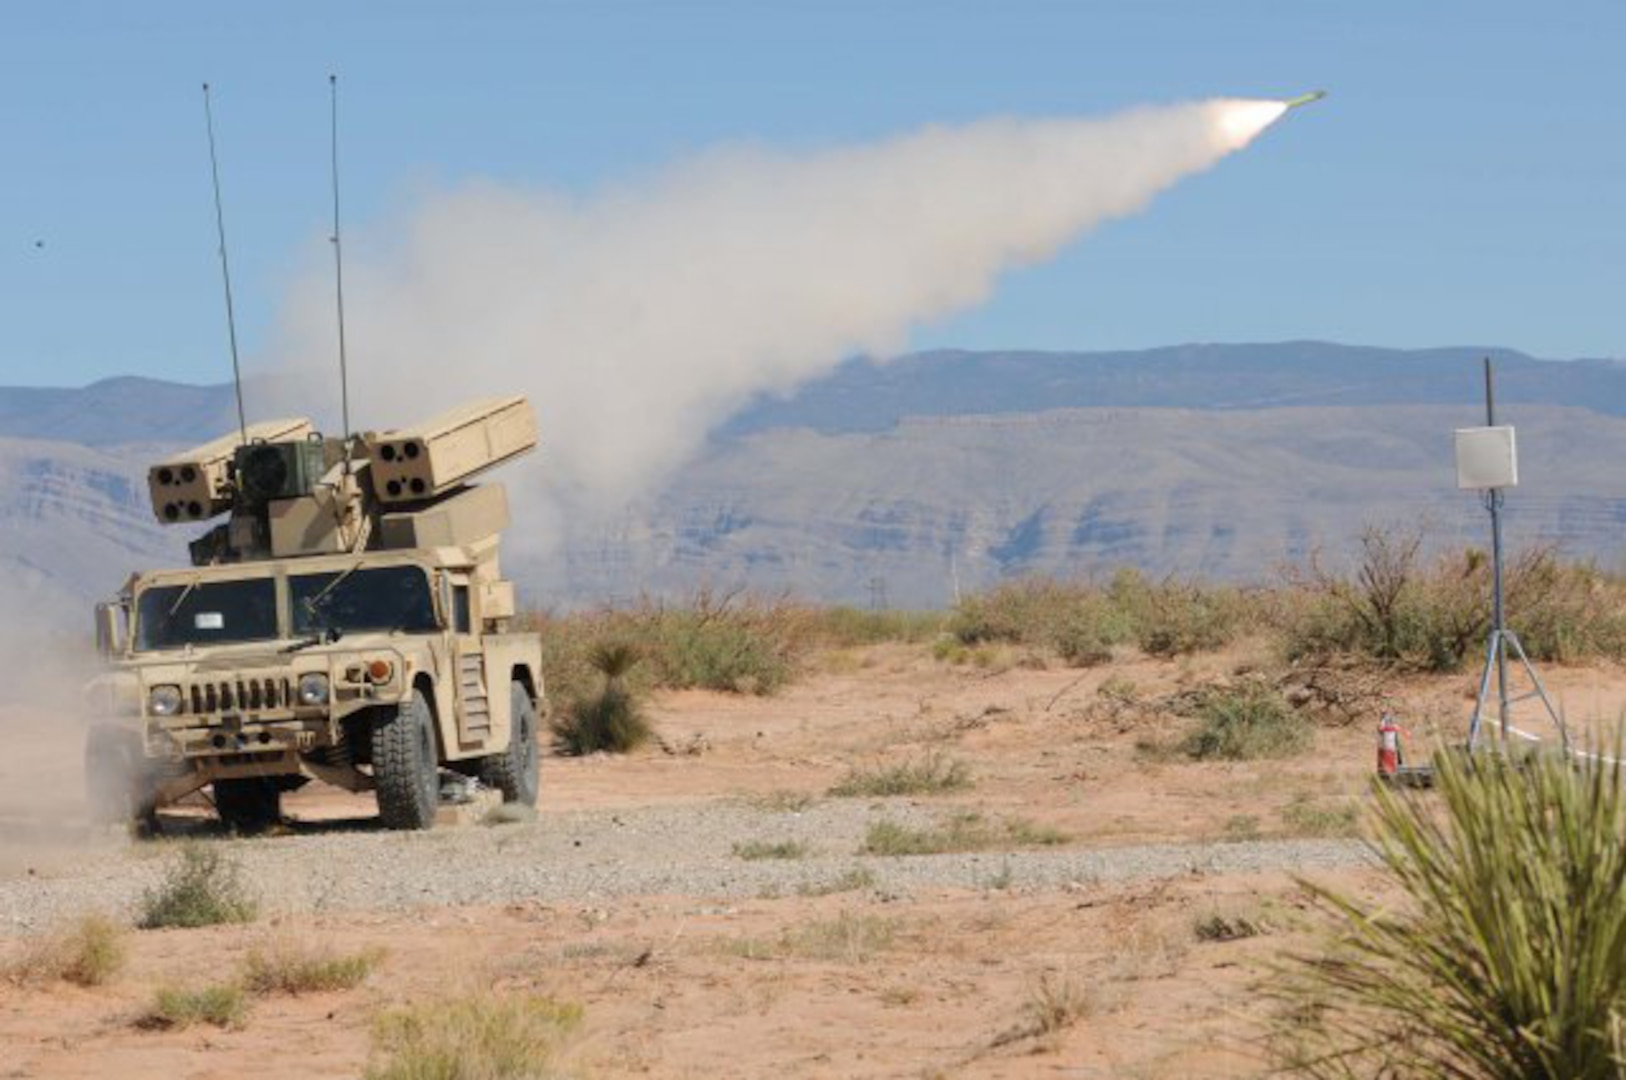 Soldiers from 2nd Battalion, 263rd Air Defense Artillery, South Carolina National Guard, send a stinger missile downrange from the Humvee-mounted Avenger missile system at Range 91 near Oro Grande, N.M., Oct. 23, 2011.